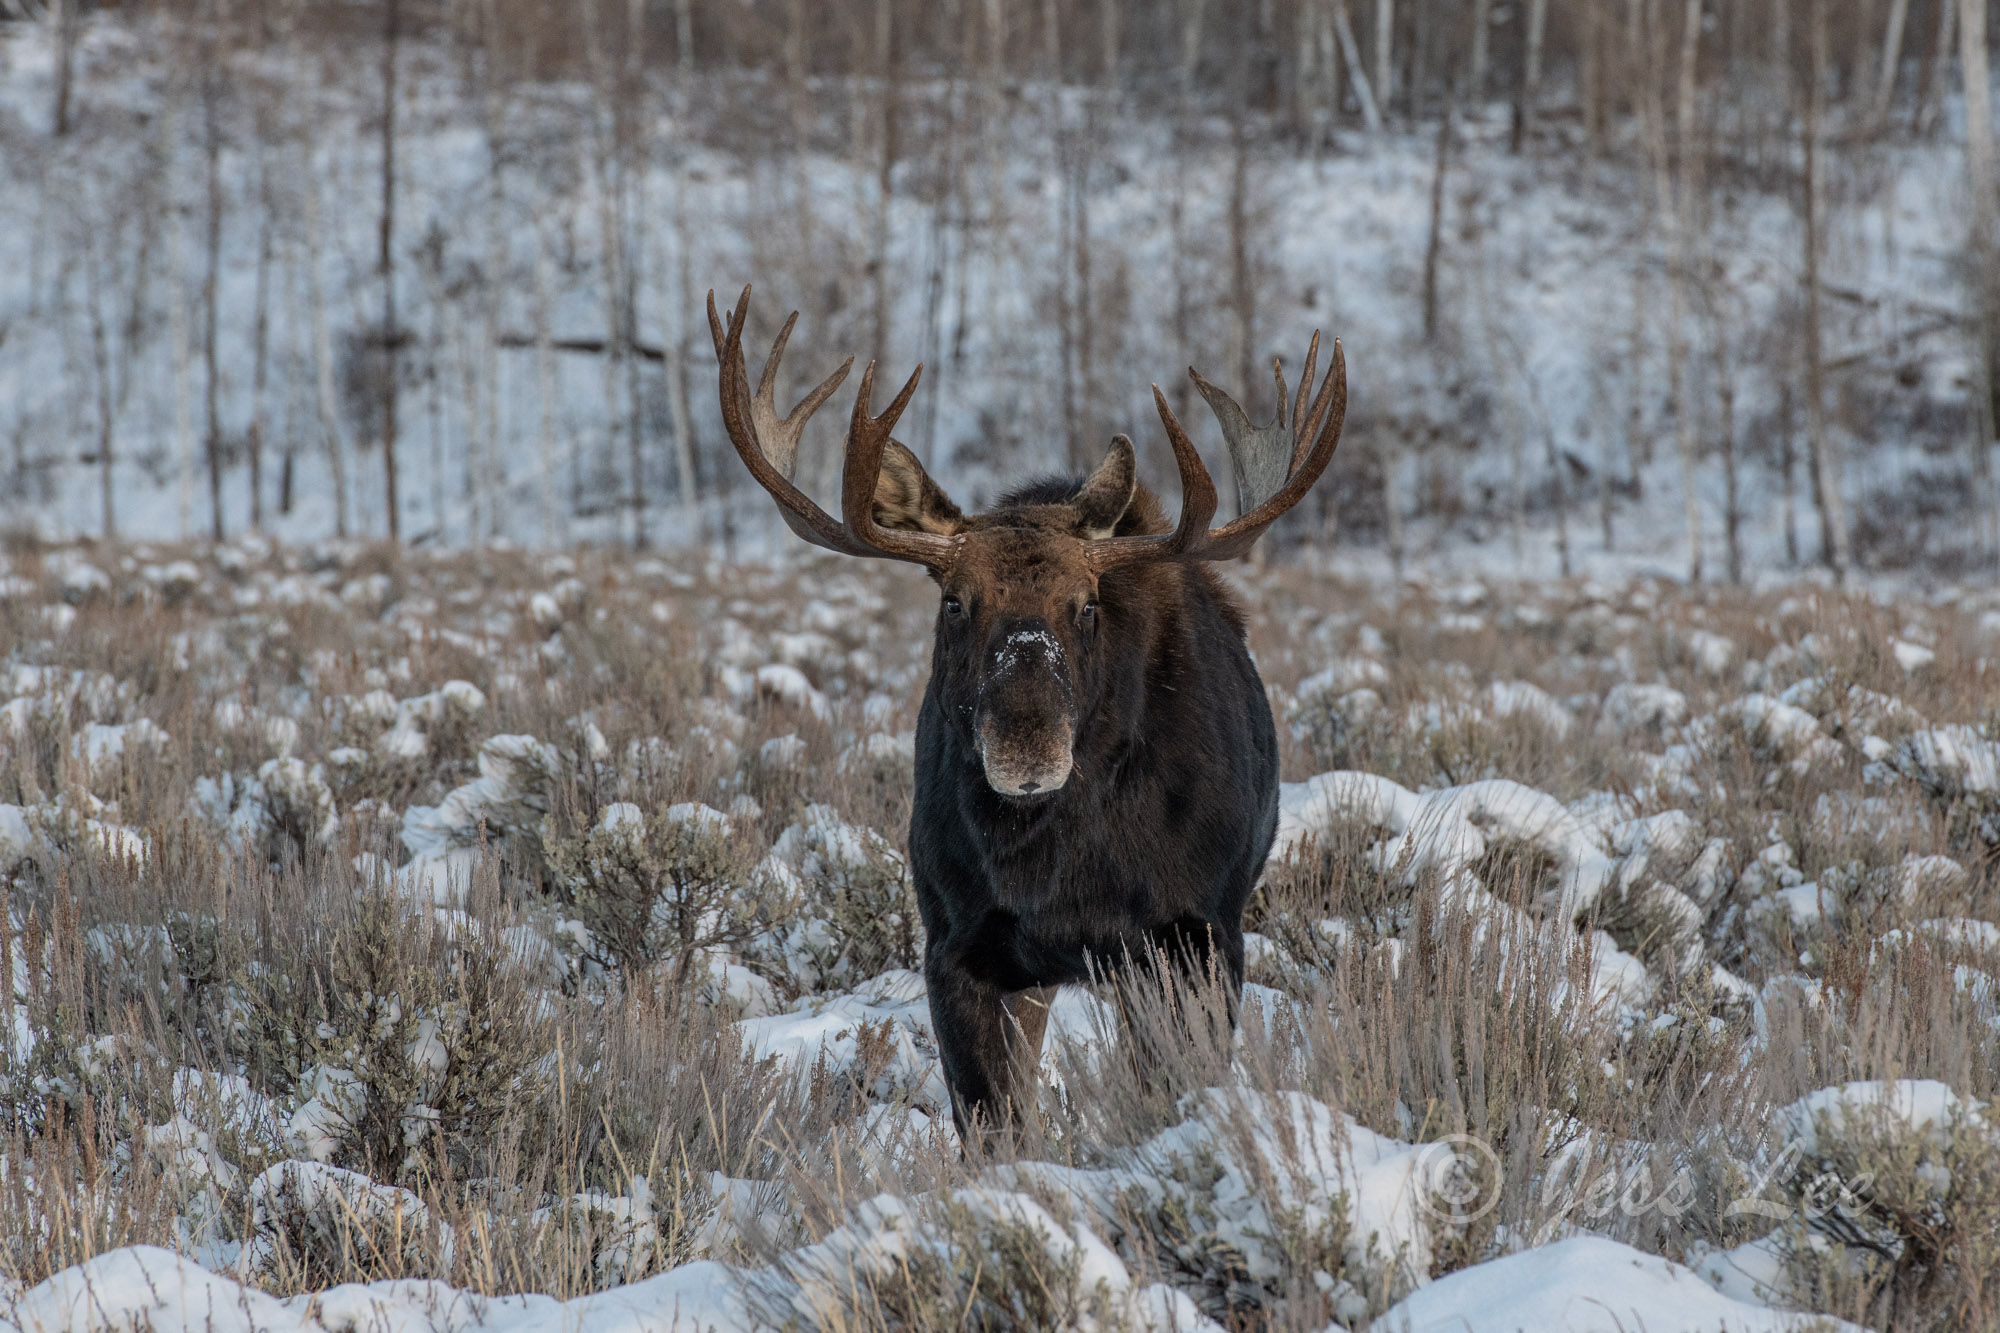 Jackson Hole bull Moose in early winter. Limited Edition of 800 prints. These Moose fine art landscape photographs are offered...